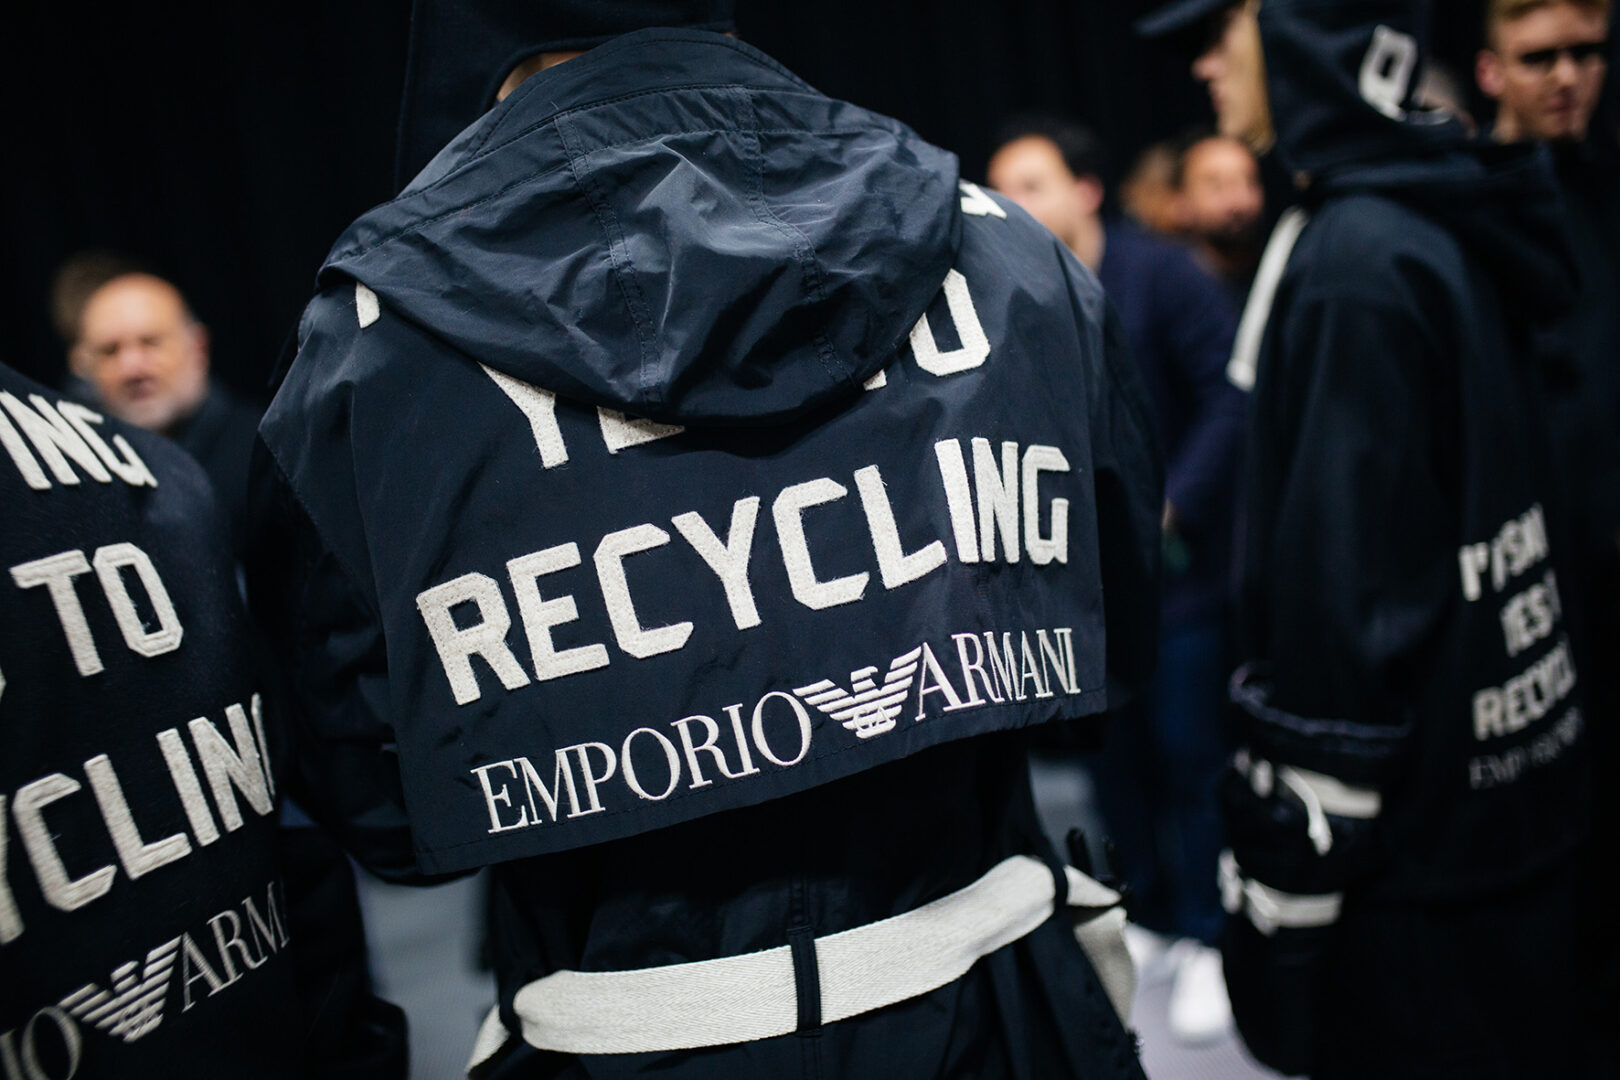 Armani/Values: improving the environment influences purchase